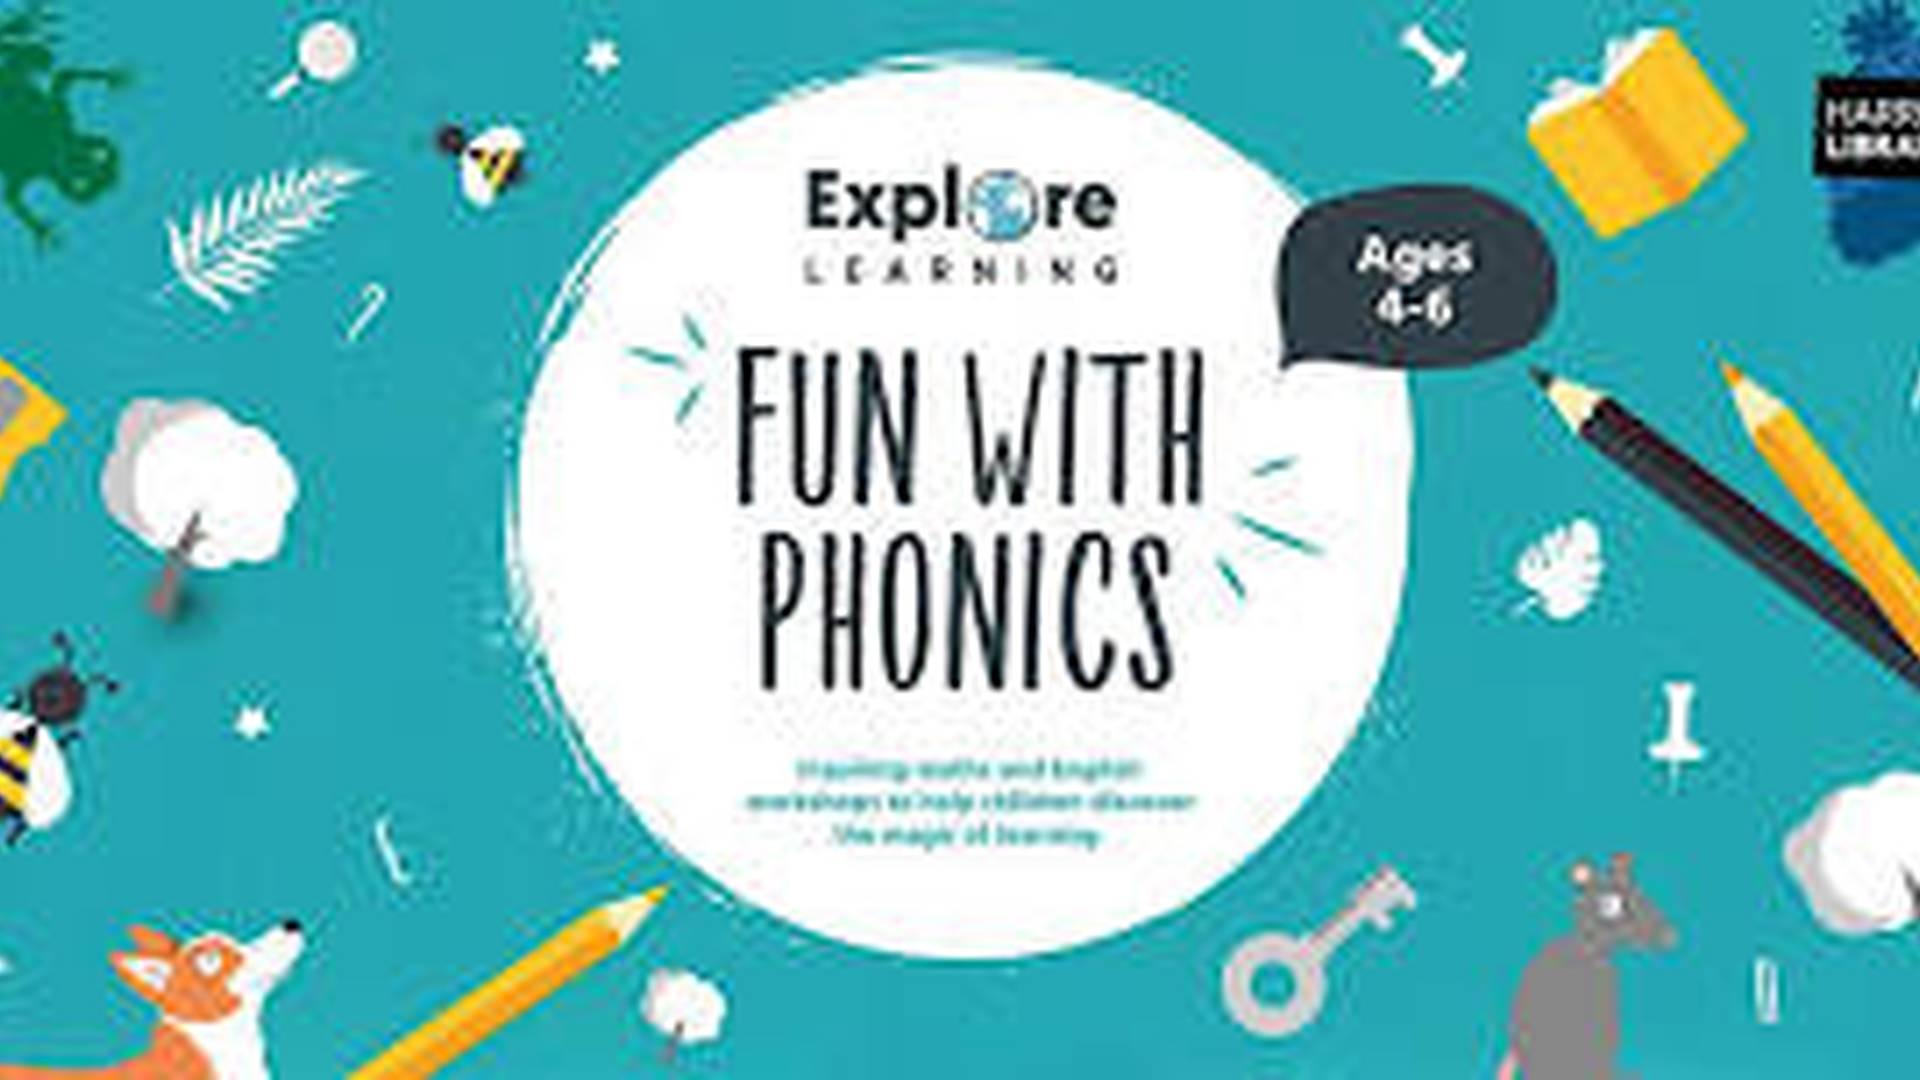 Explore Learning - Fun with Phonics (ages 4-6) photo